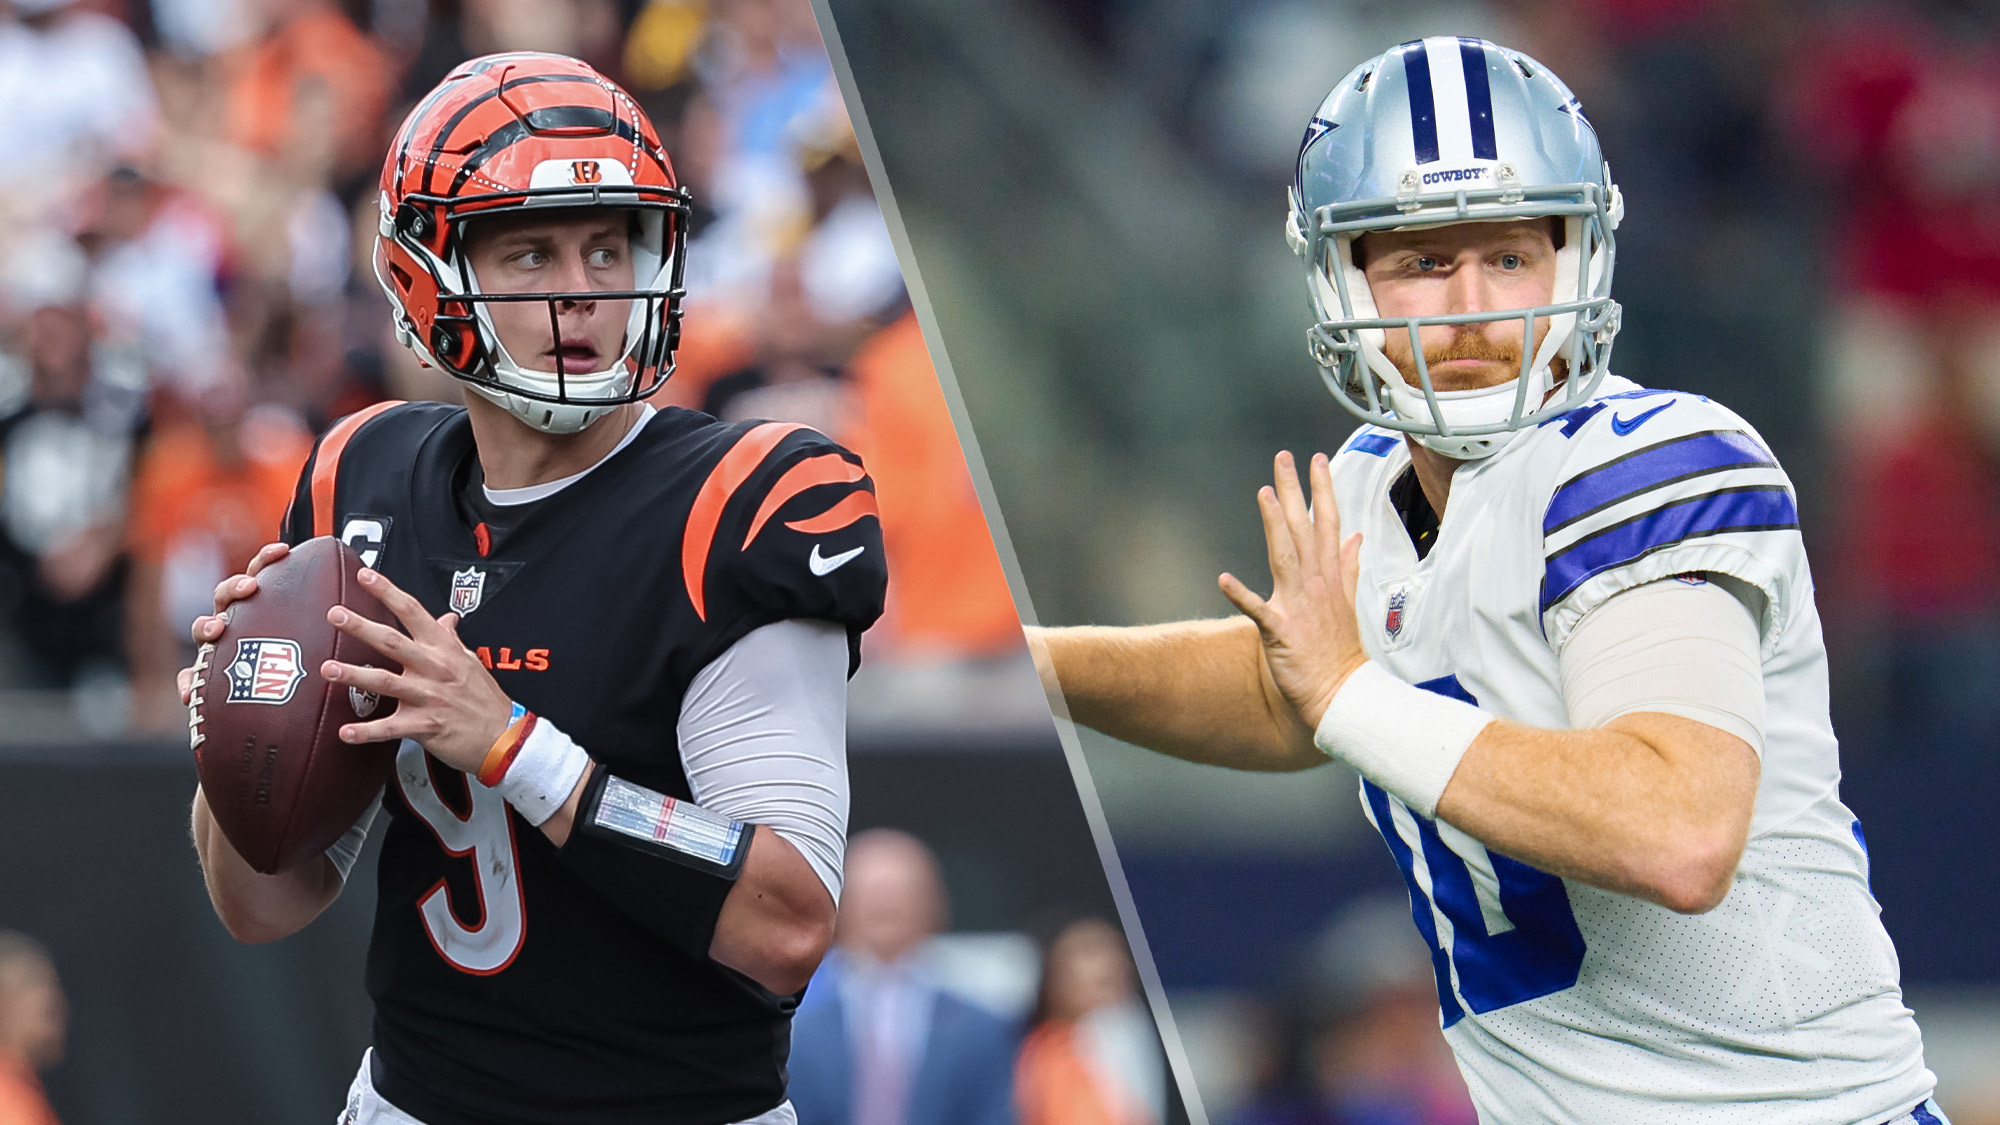 Bengals vs Cowboys live stream is today: How to watch the NFL week 2 online